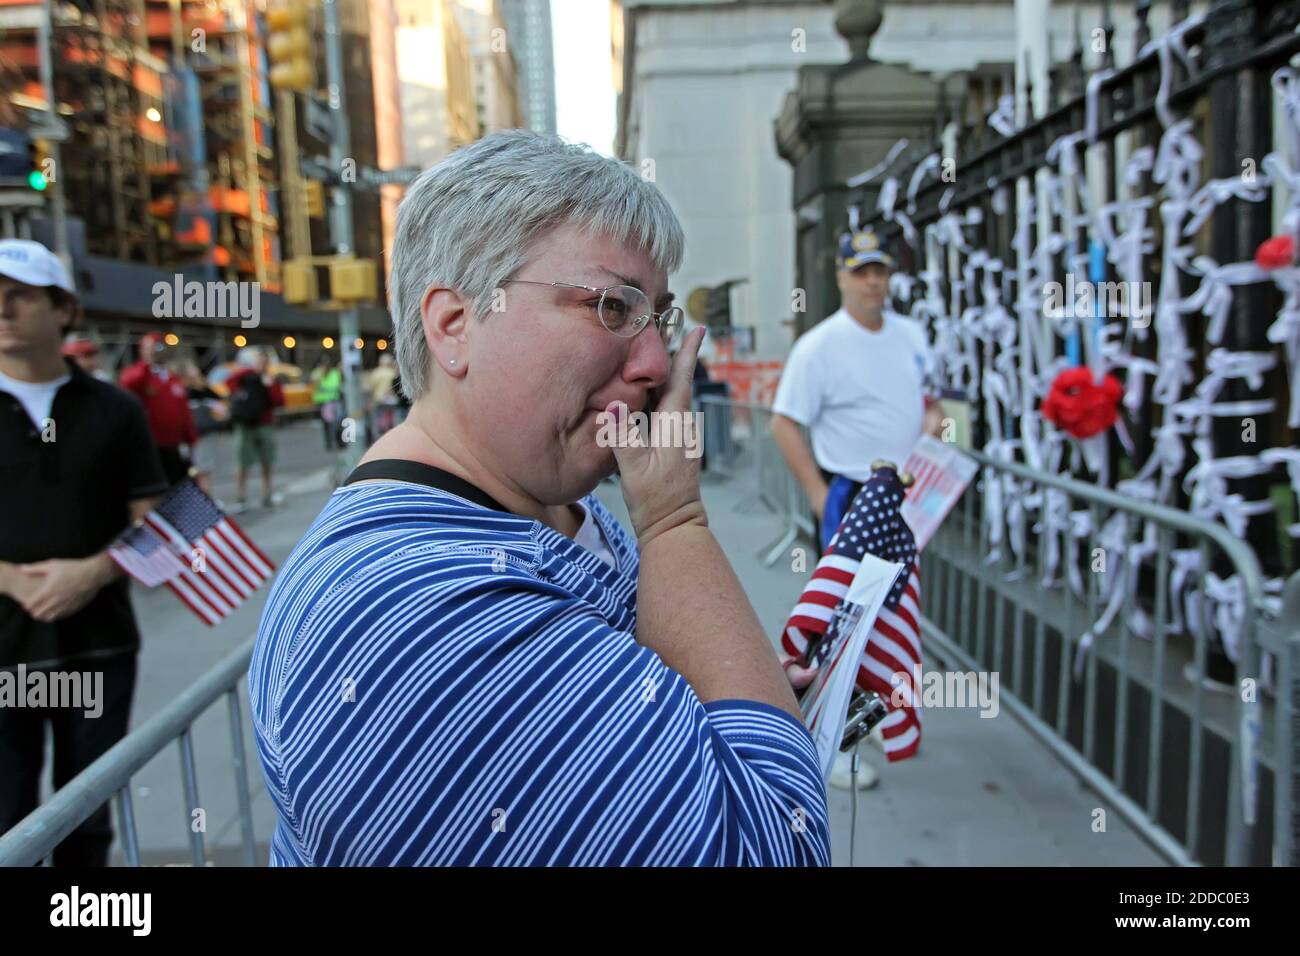 NO FILM, NO VIDEO, NO TV, NO DOCUMENTARY - Kim Warnke, a middle school teacher from Sasnborn, Iowa, is overcome with emotion as she stands before St. Paul's Church, a block from Ground Zero, Sunday, September 11, 2011 in New York. She and her volunteers place paper flowers that her students had created in Iowa and brought with them to New York to be placed on this day. Photo by Michael Bryant/Philadelphia Inquirer/MCT/ABACAPRESS.COM Stock Photo